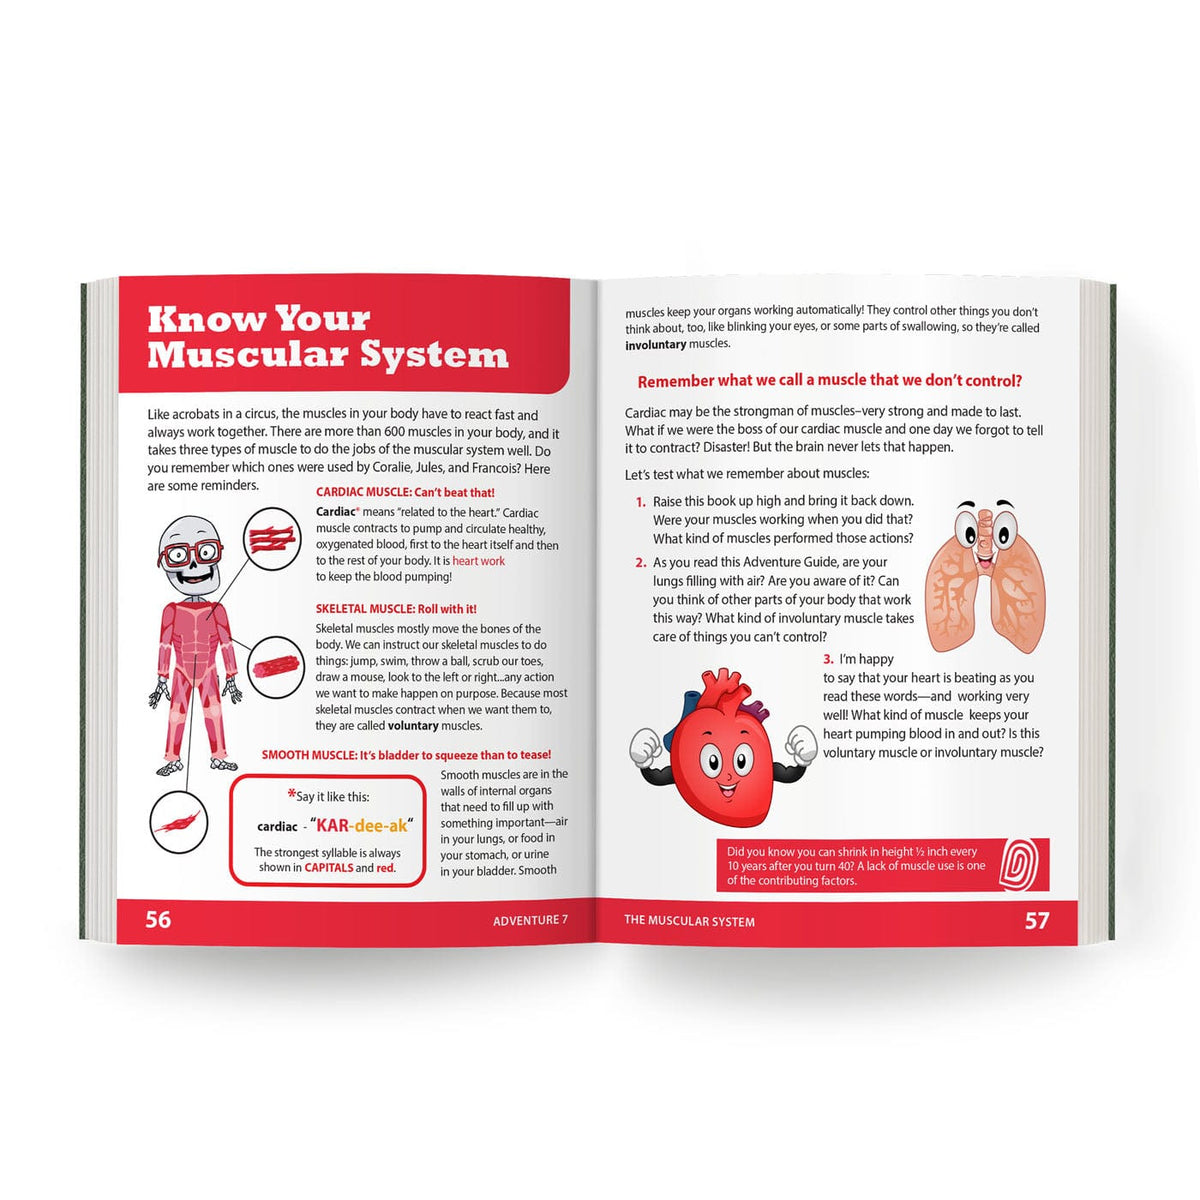 The Muscular System: Adventure 7 Health Education for Children